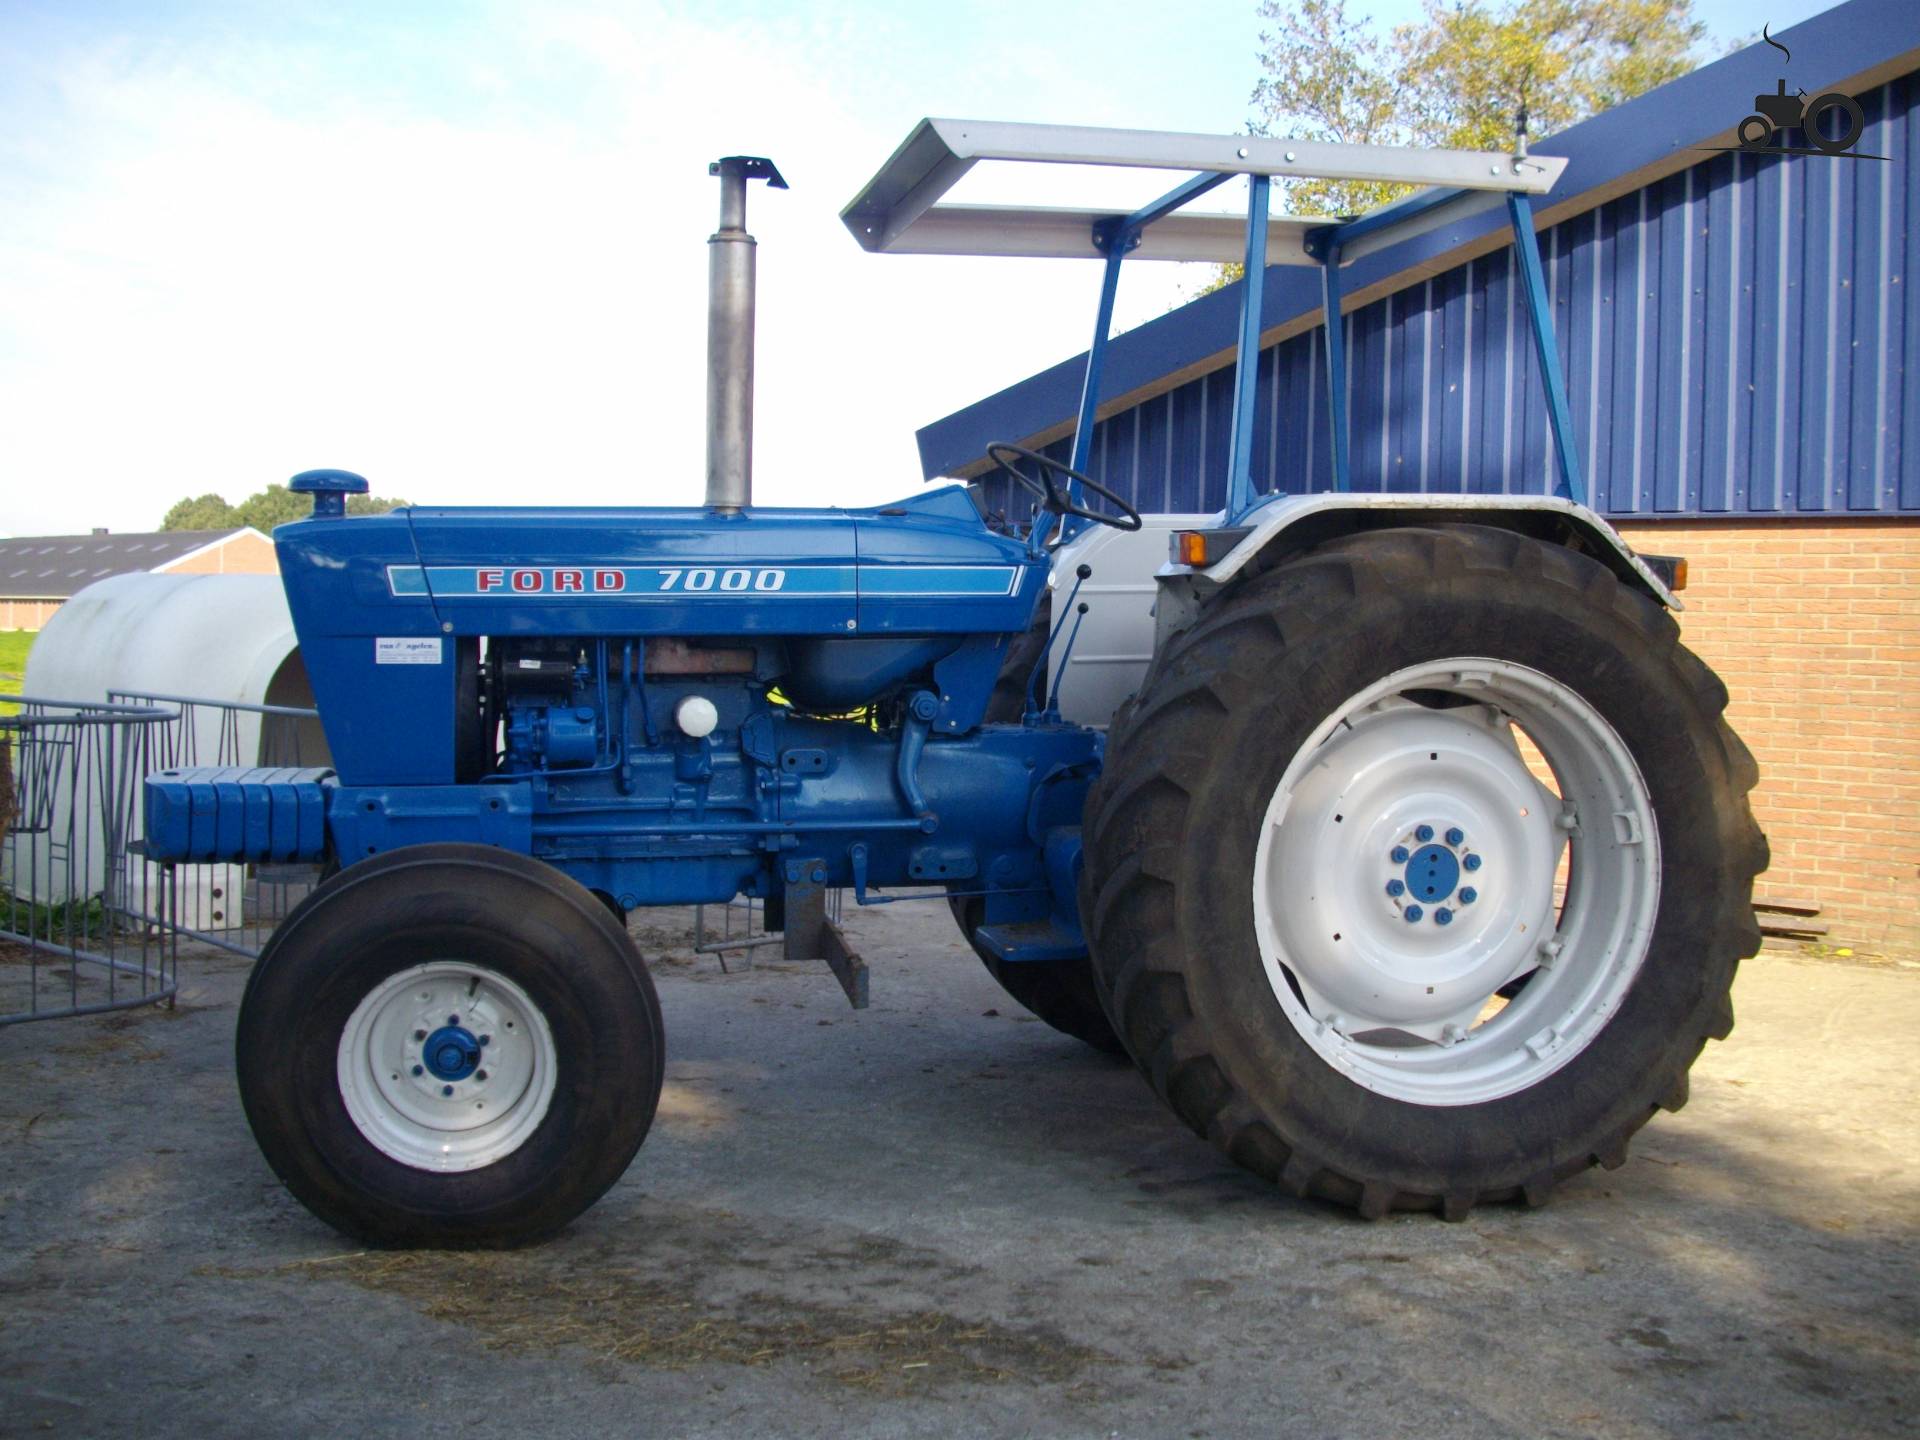 Ford 7000 Tractor Related Keywords & Suggestions - Ford 7000 Tractor ...